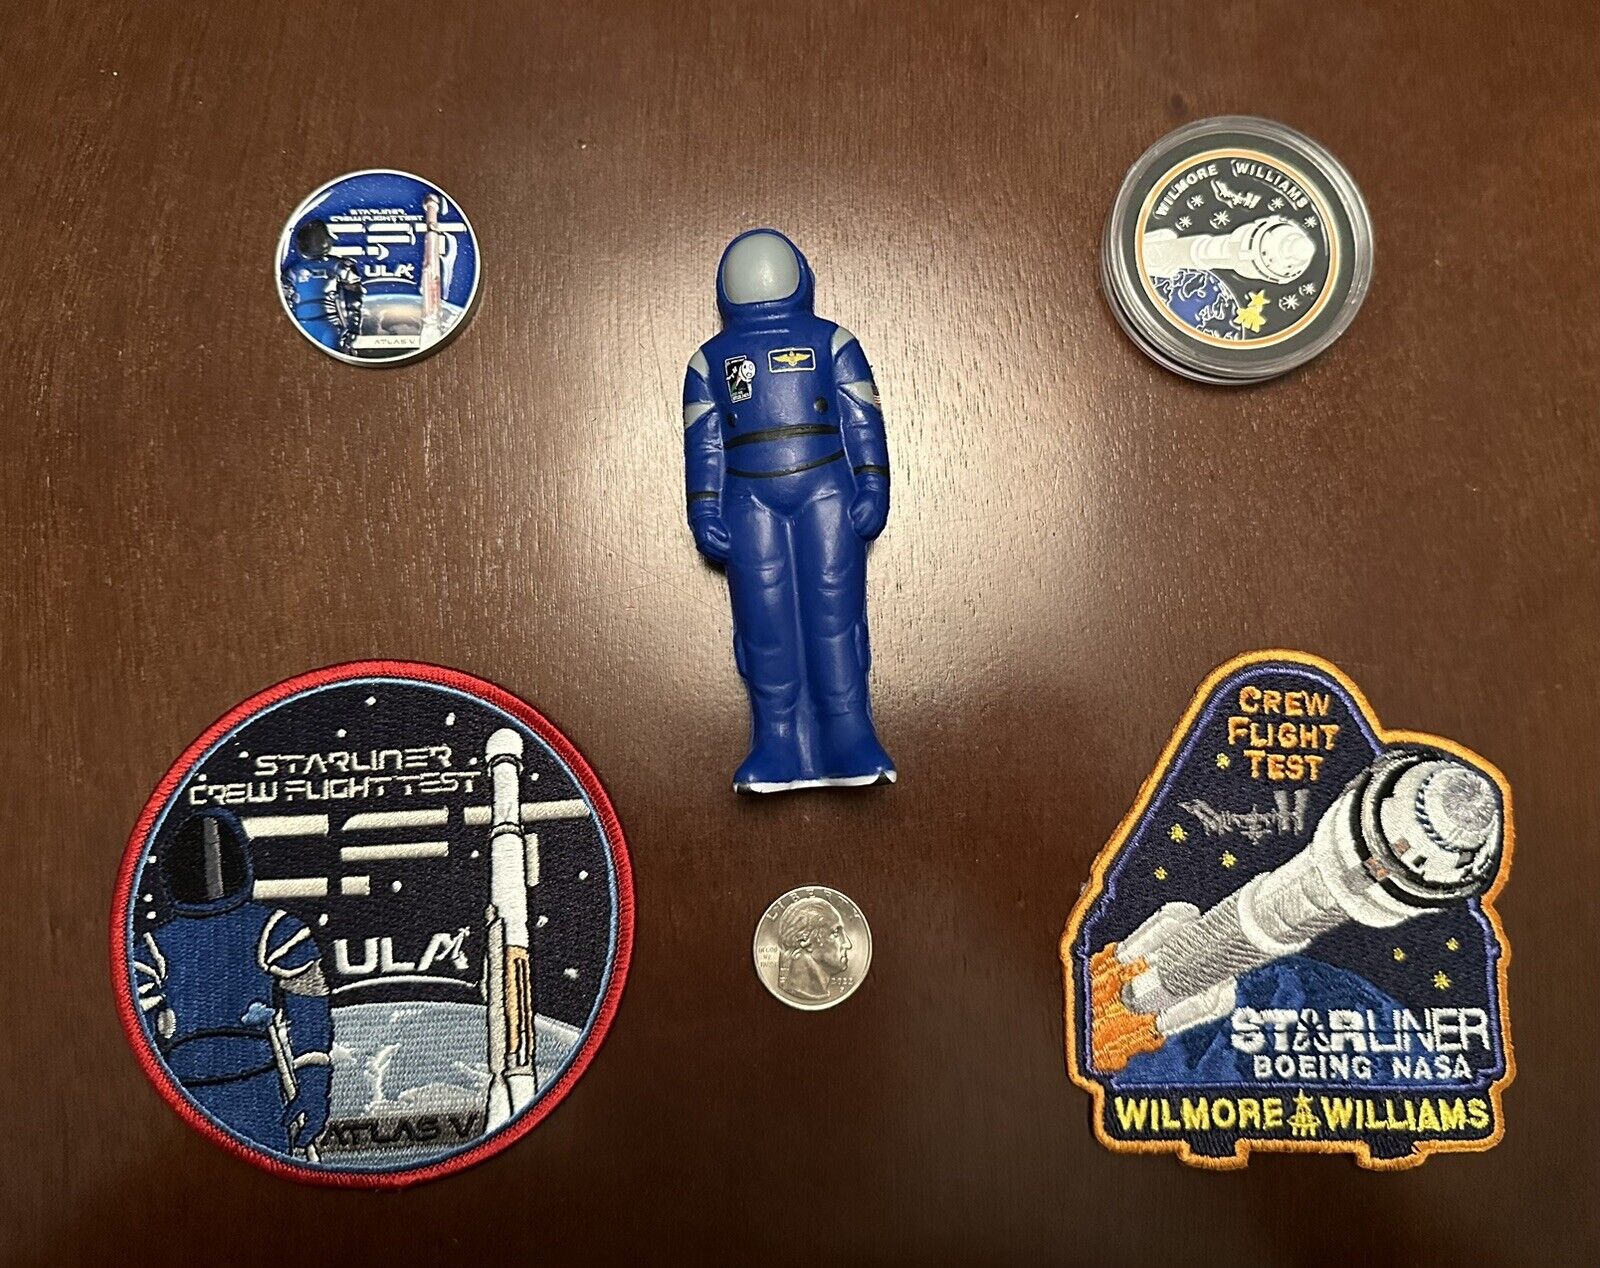 NEW Boeing Starliner CFT Crew Flight Coins Patches Astronaut ULA Atlas V NASA